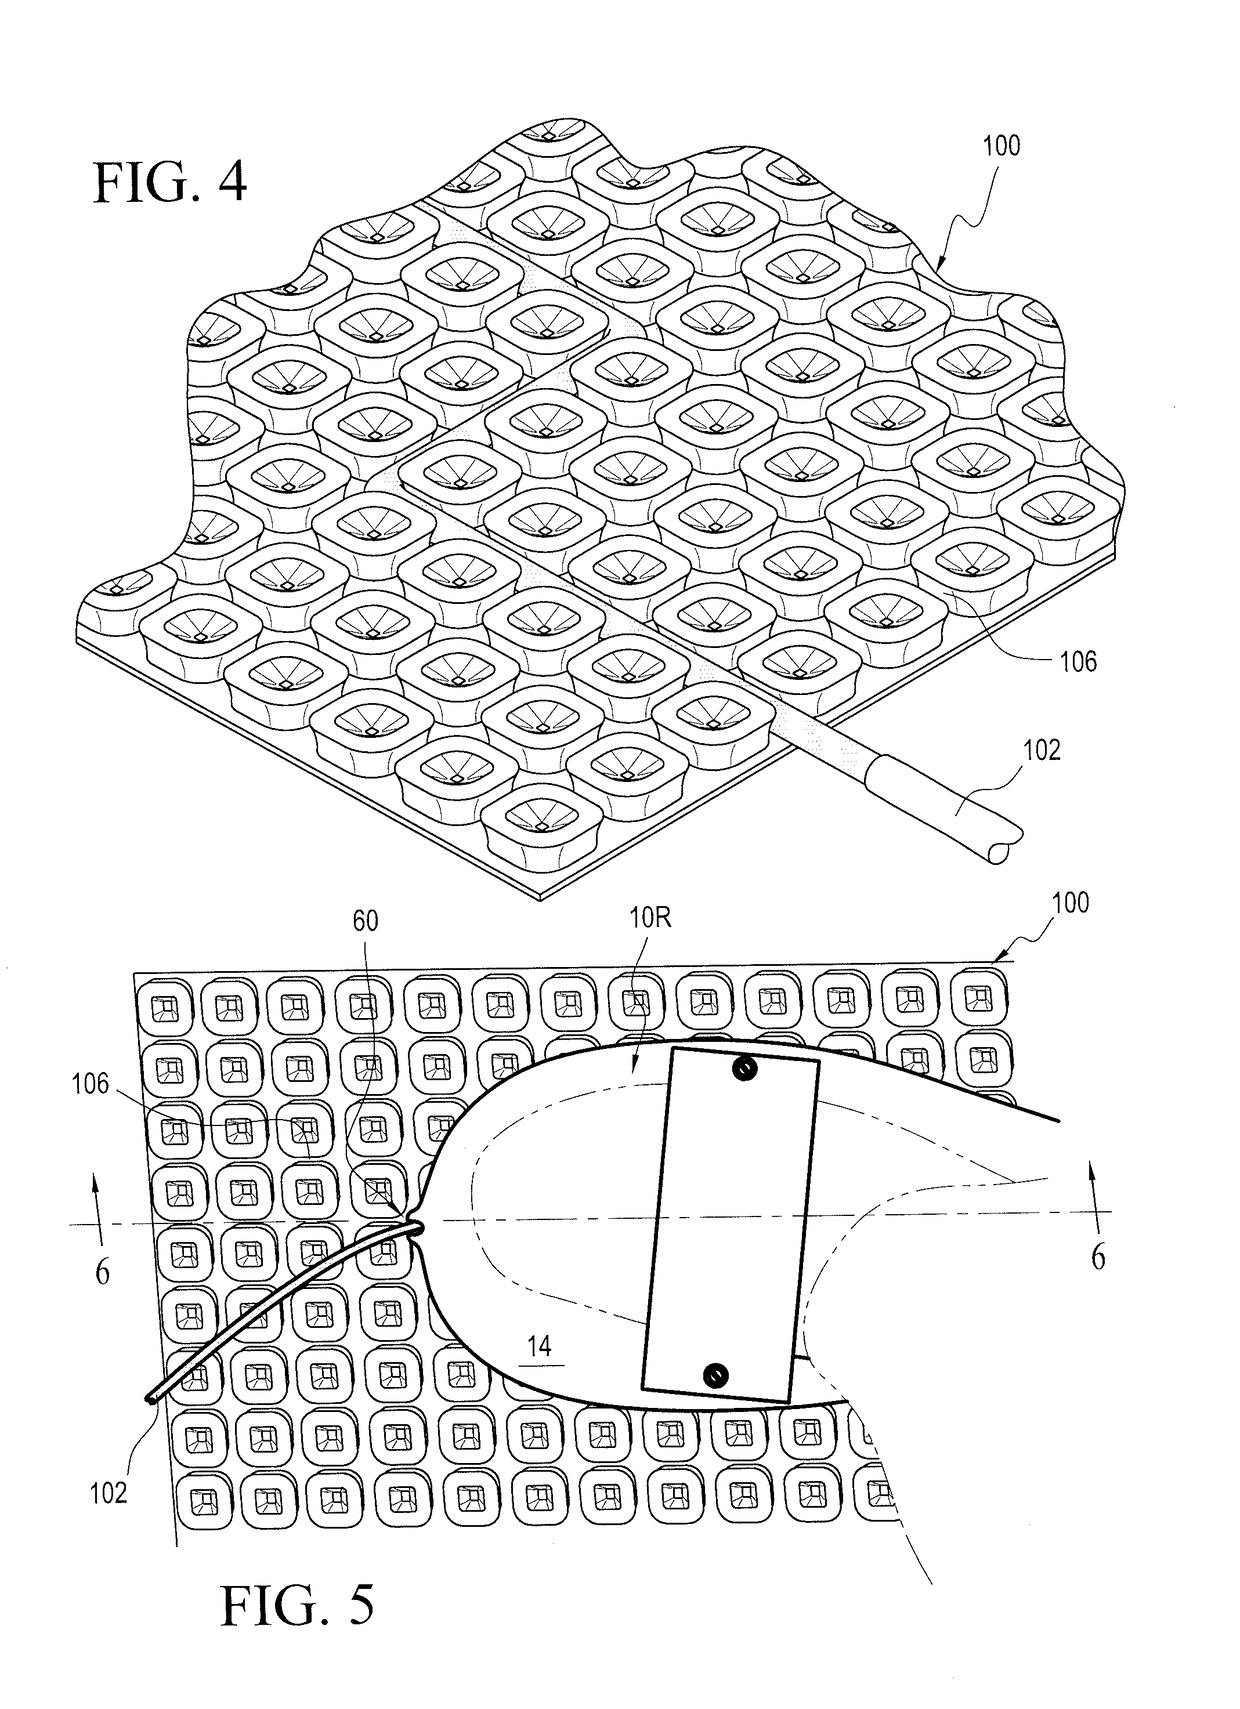 Foot mounted work accessory and method of use